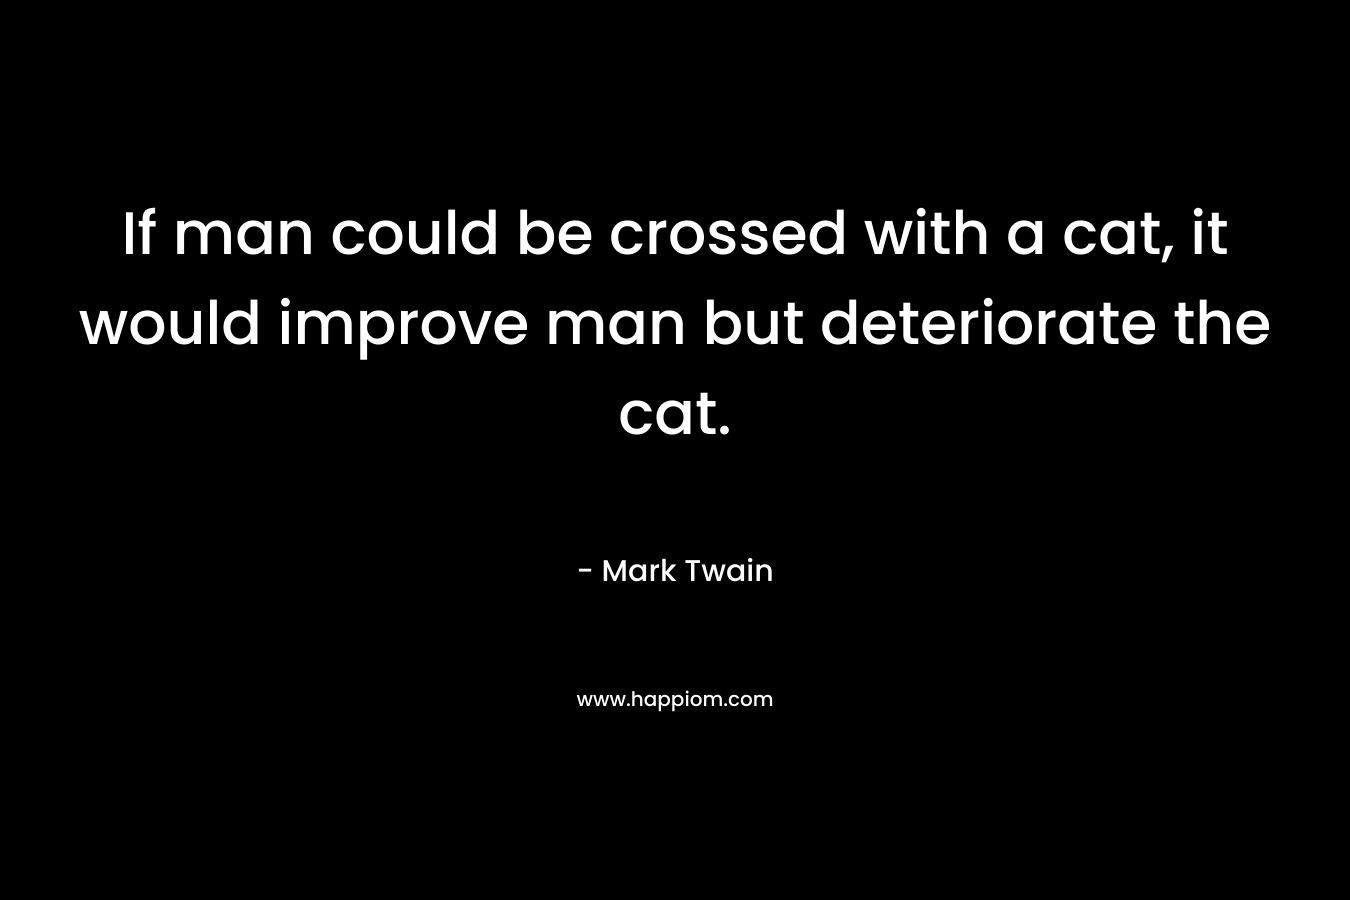 If man could be crossed with a cat, it would improve man but deteriorate the cat.